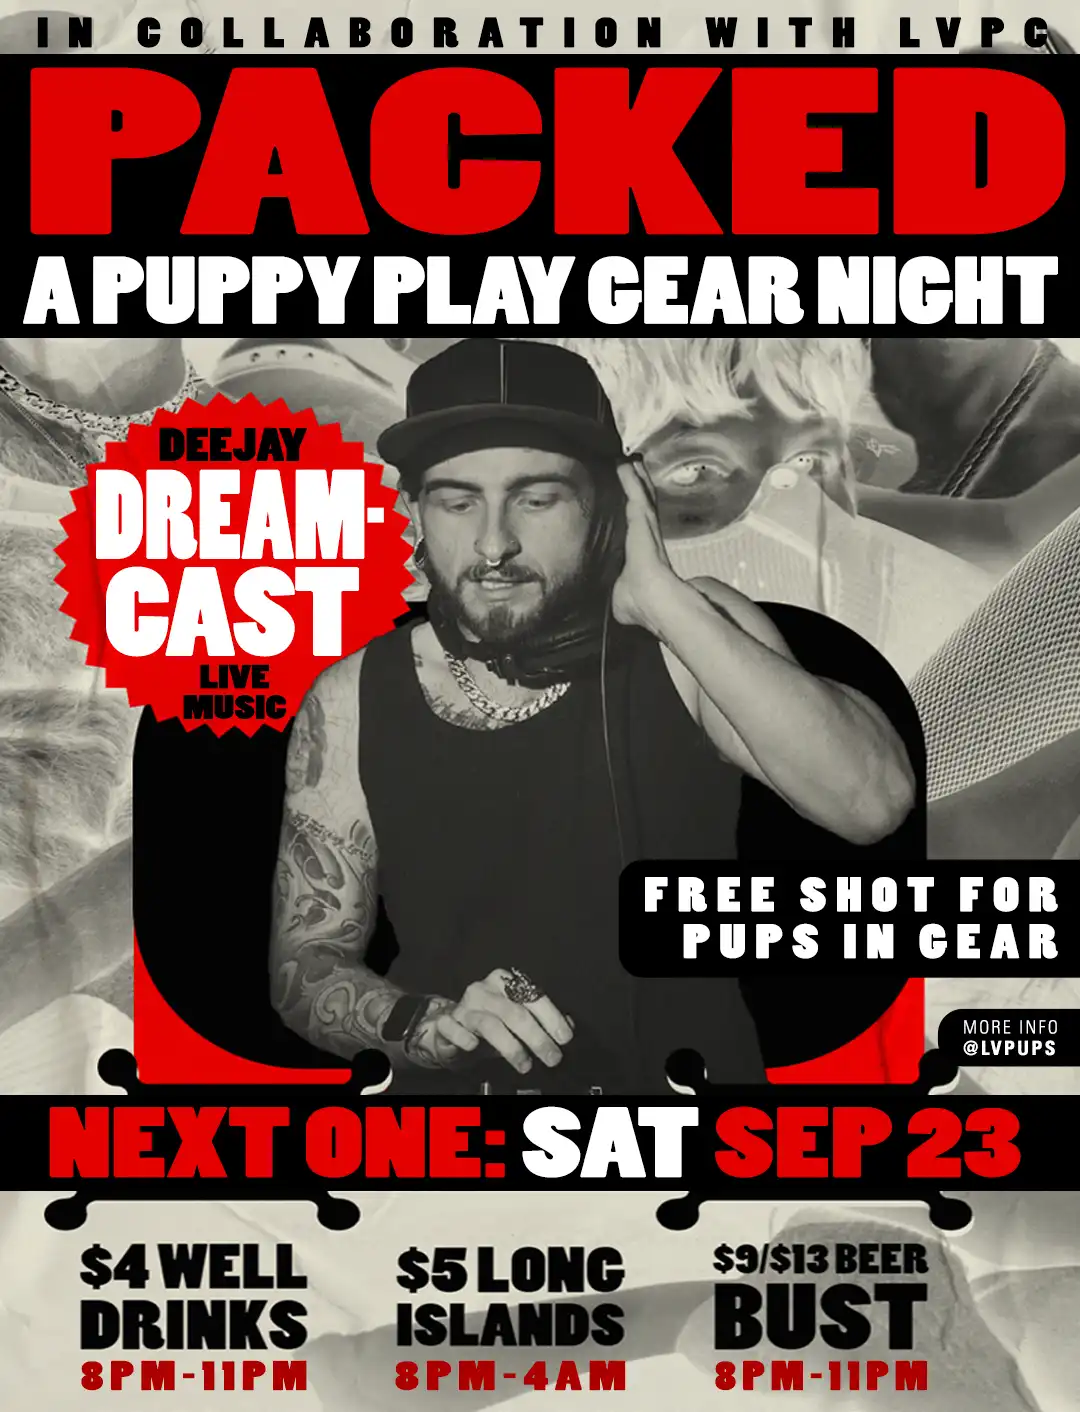 PACKED - A Puppy Play Gear Night at The Garage Sept 23